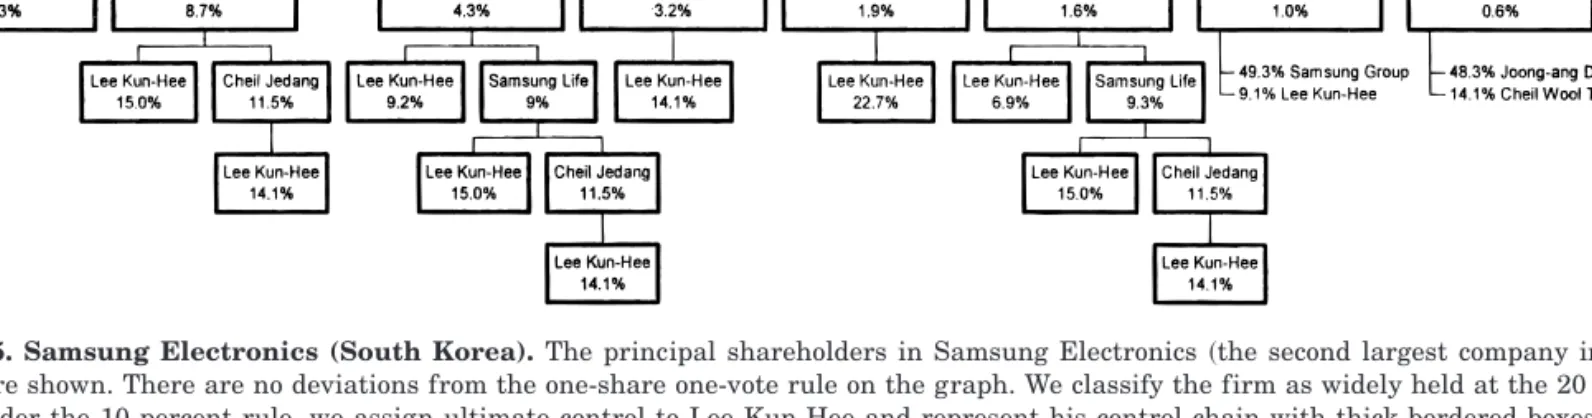 Figure 5. Samsung Electronics (South Korea). The principal shareholders in Samsung Electronics ~the second largest company in South Korea ! are shown